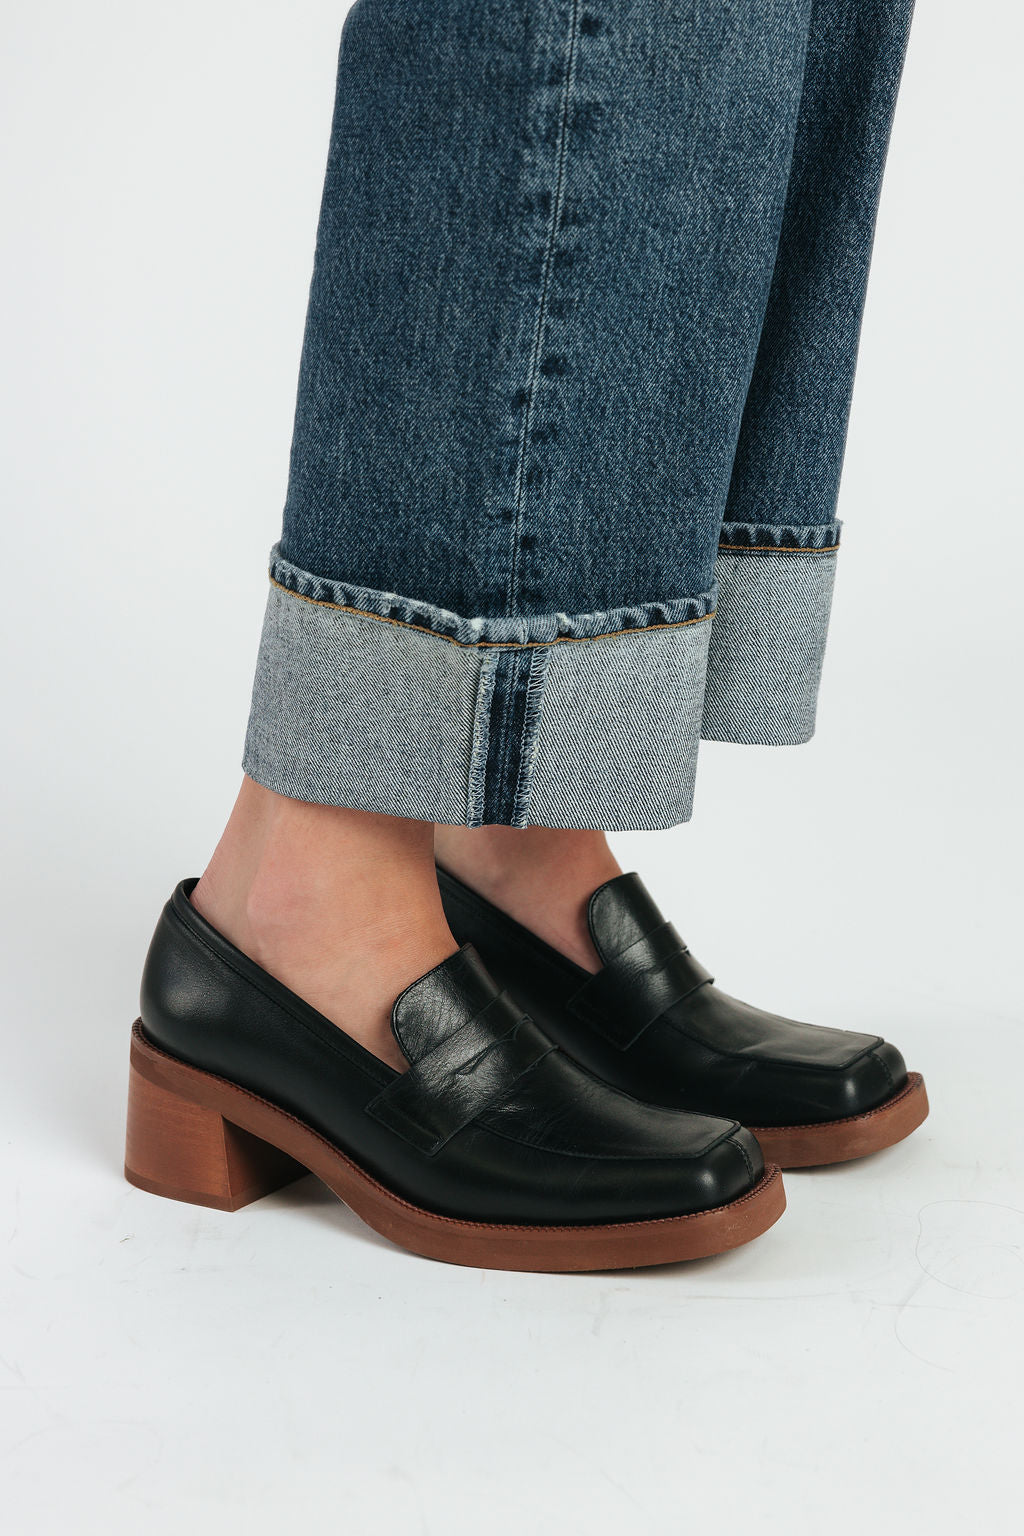 Roxanne Loafers